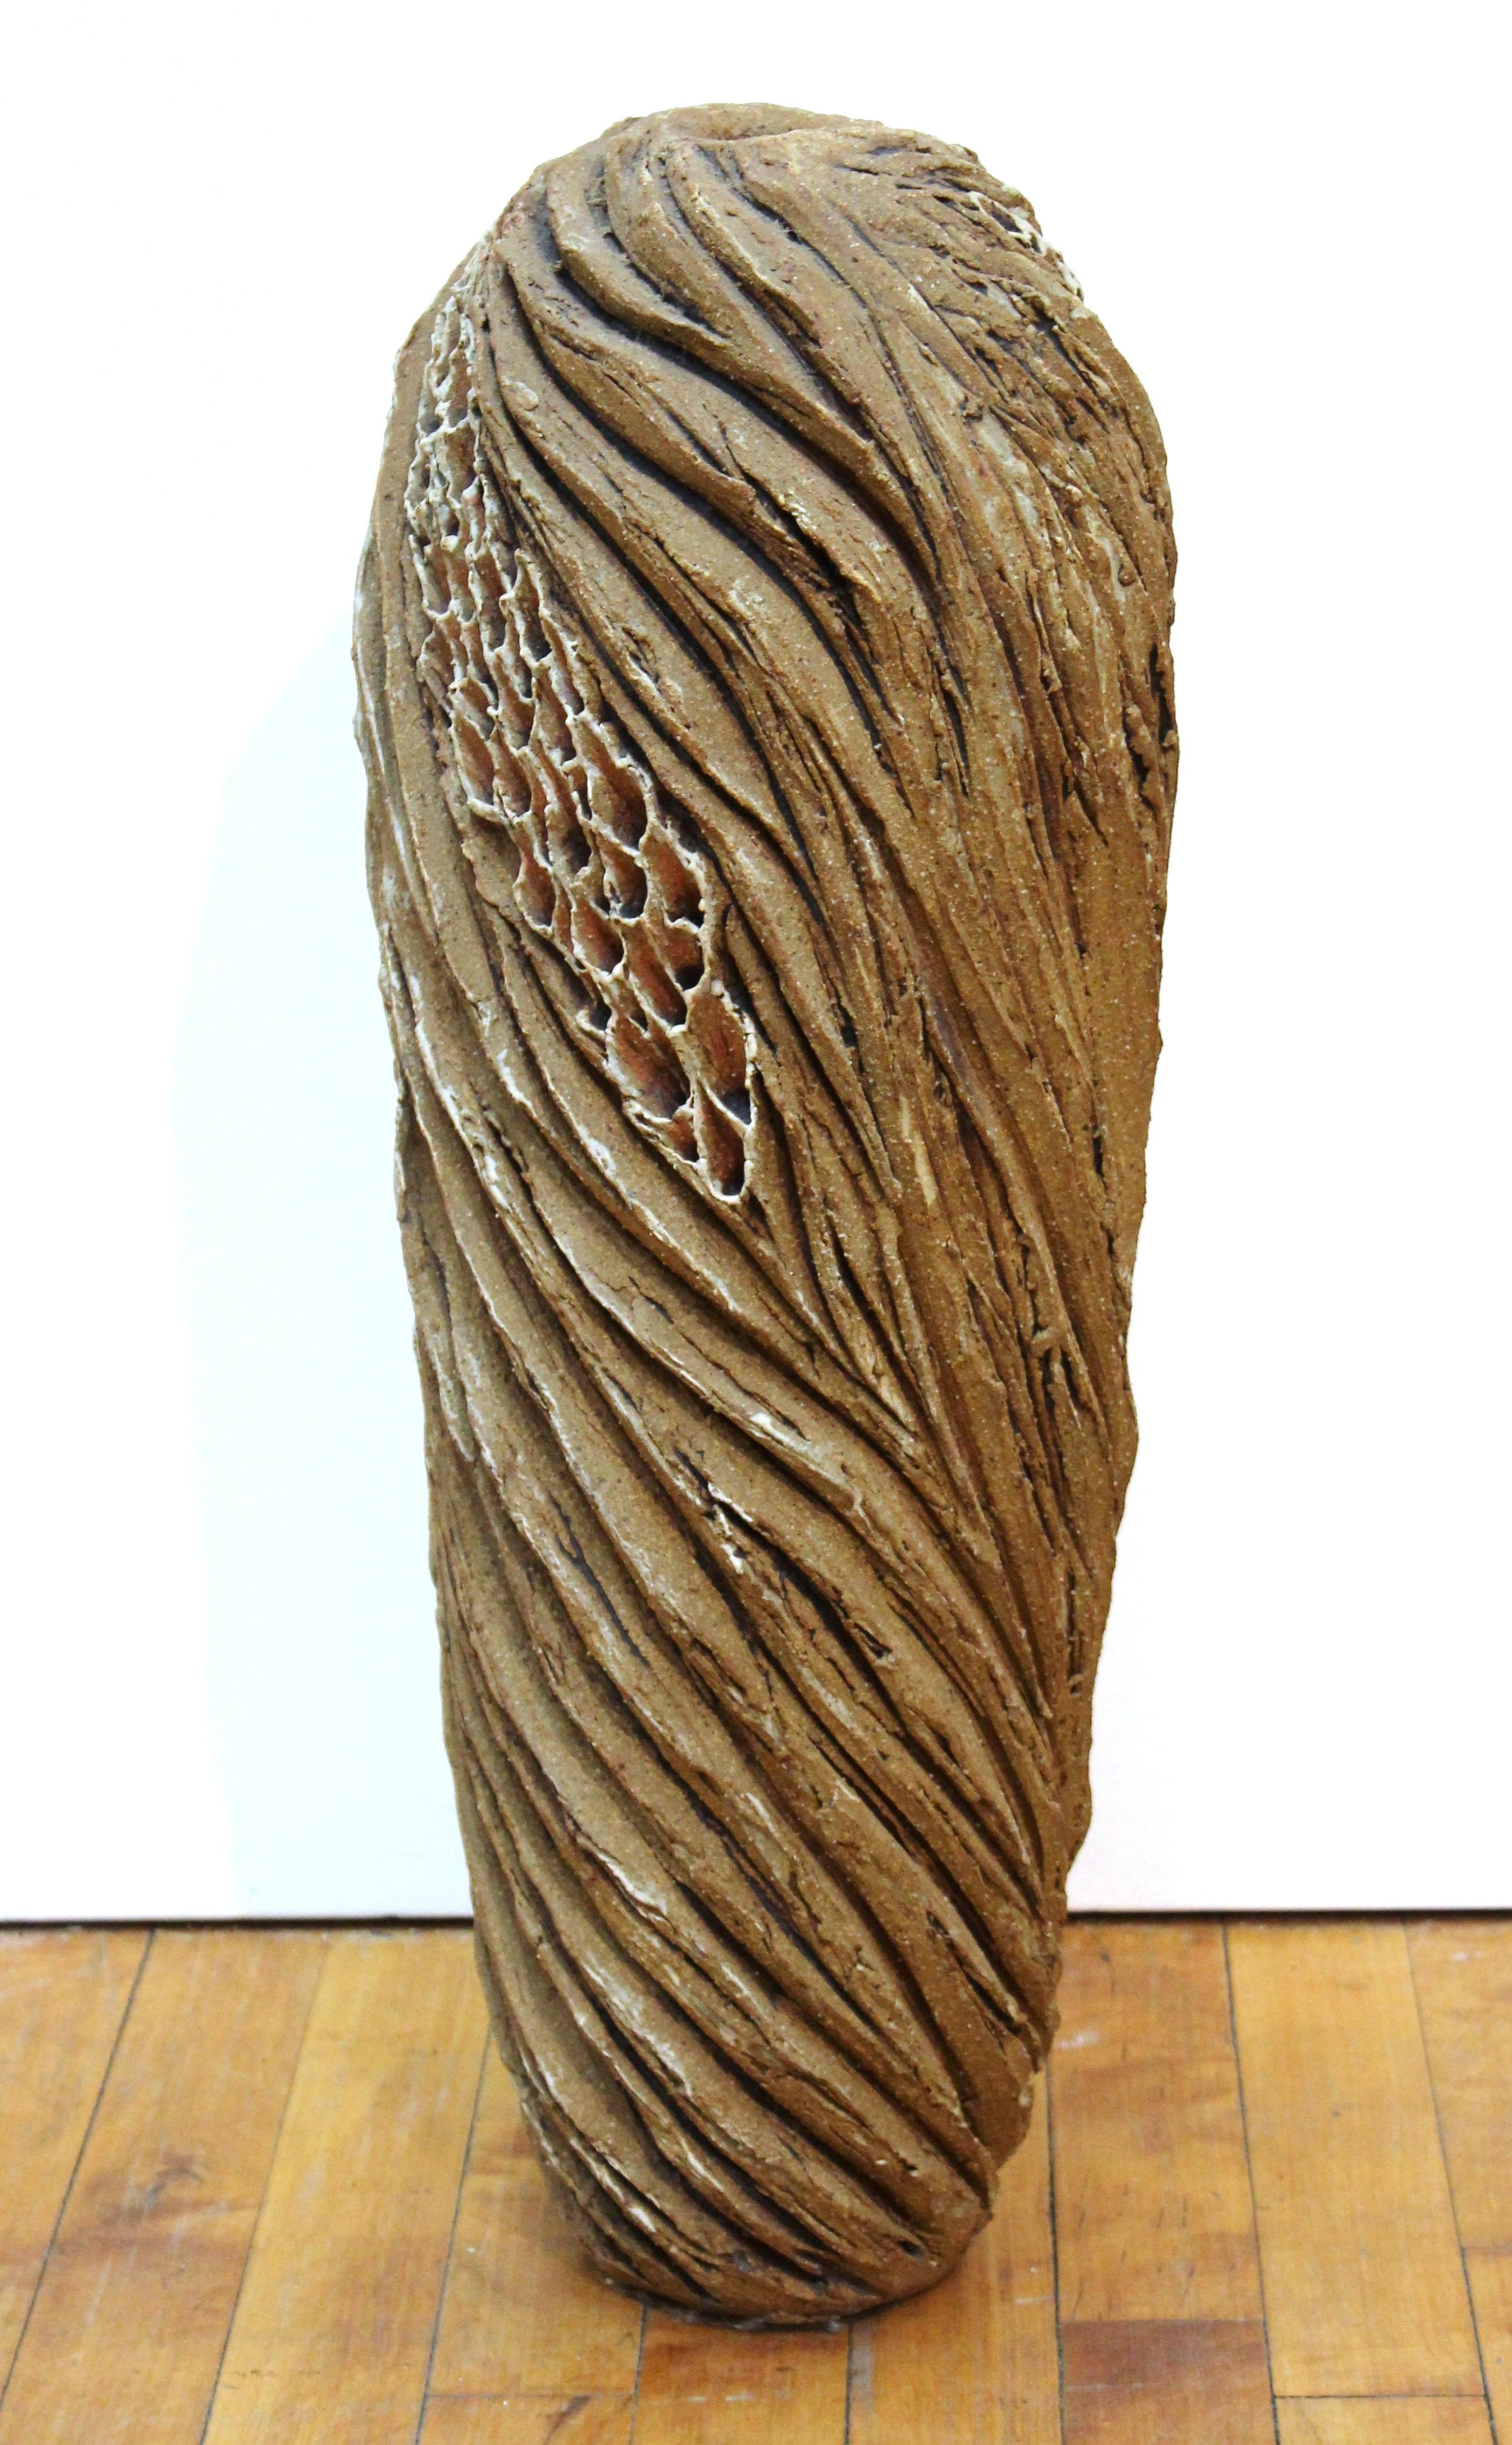 Mid-Century Modern style art studio pottery vase with organic sculpted elements.